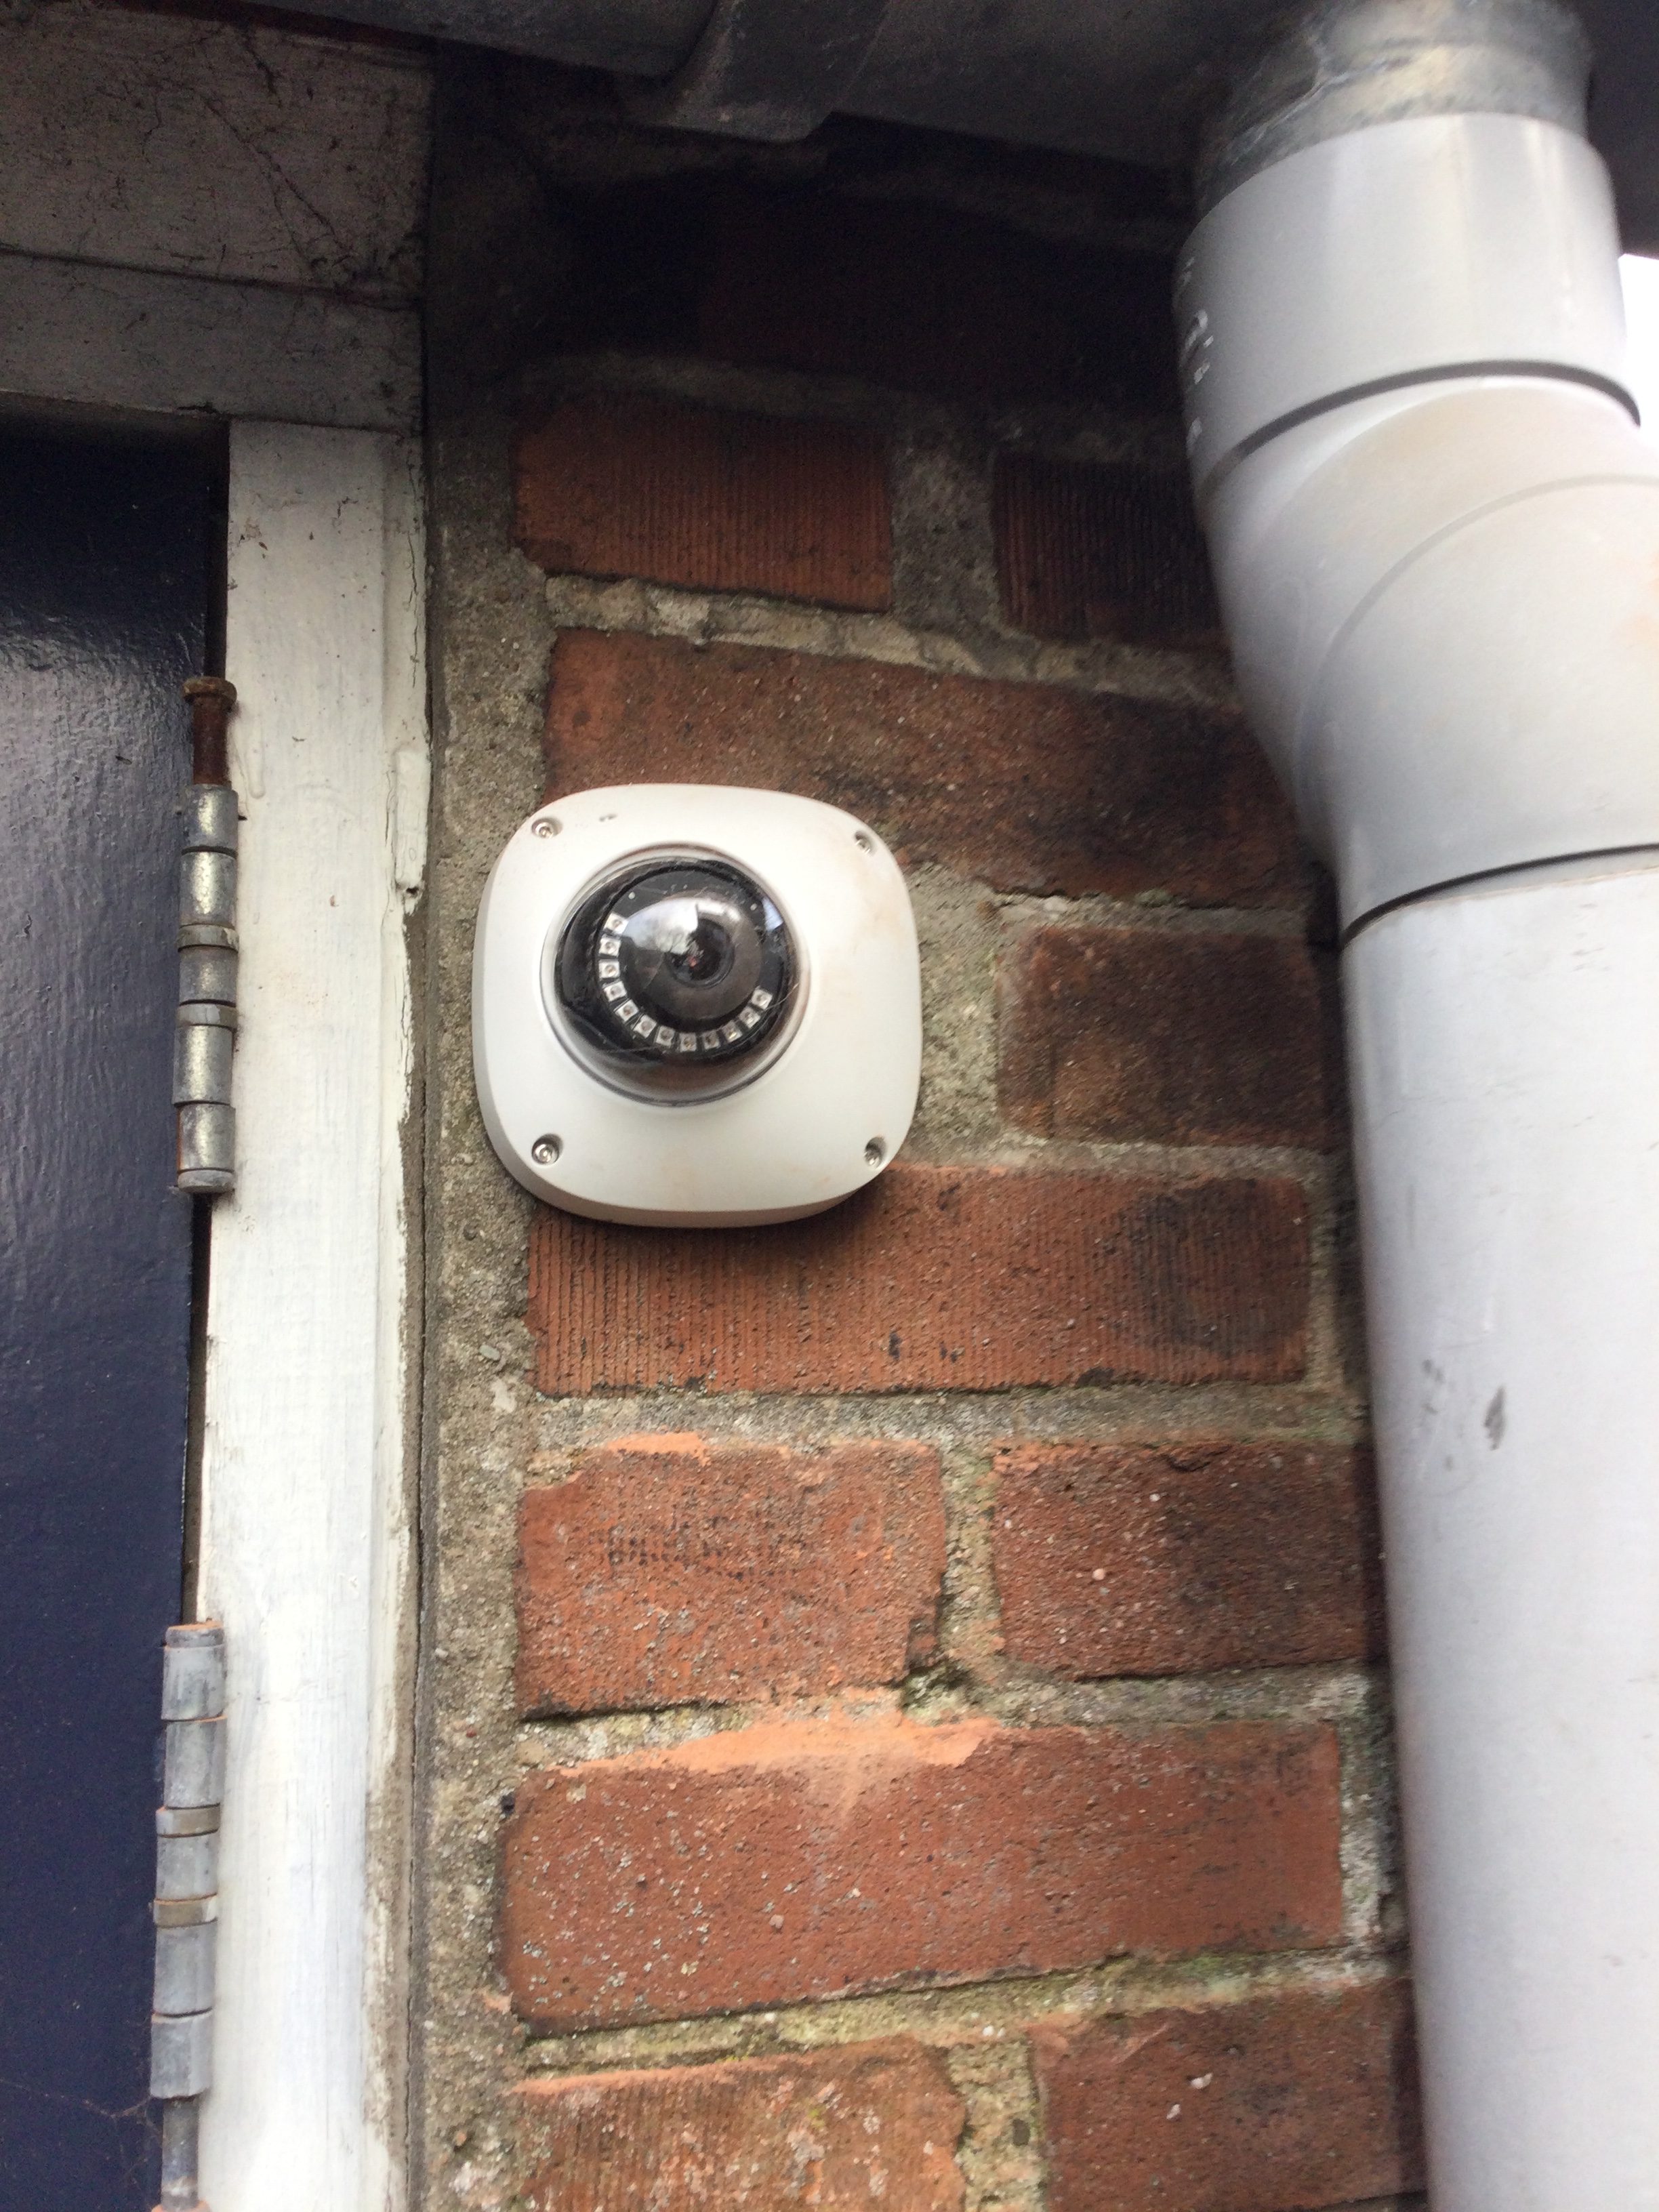 Installation of security camera and lights